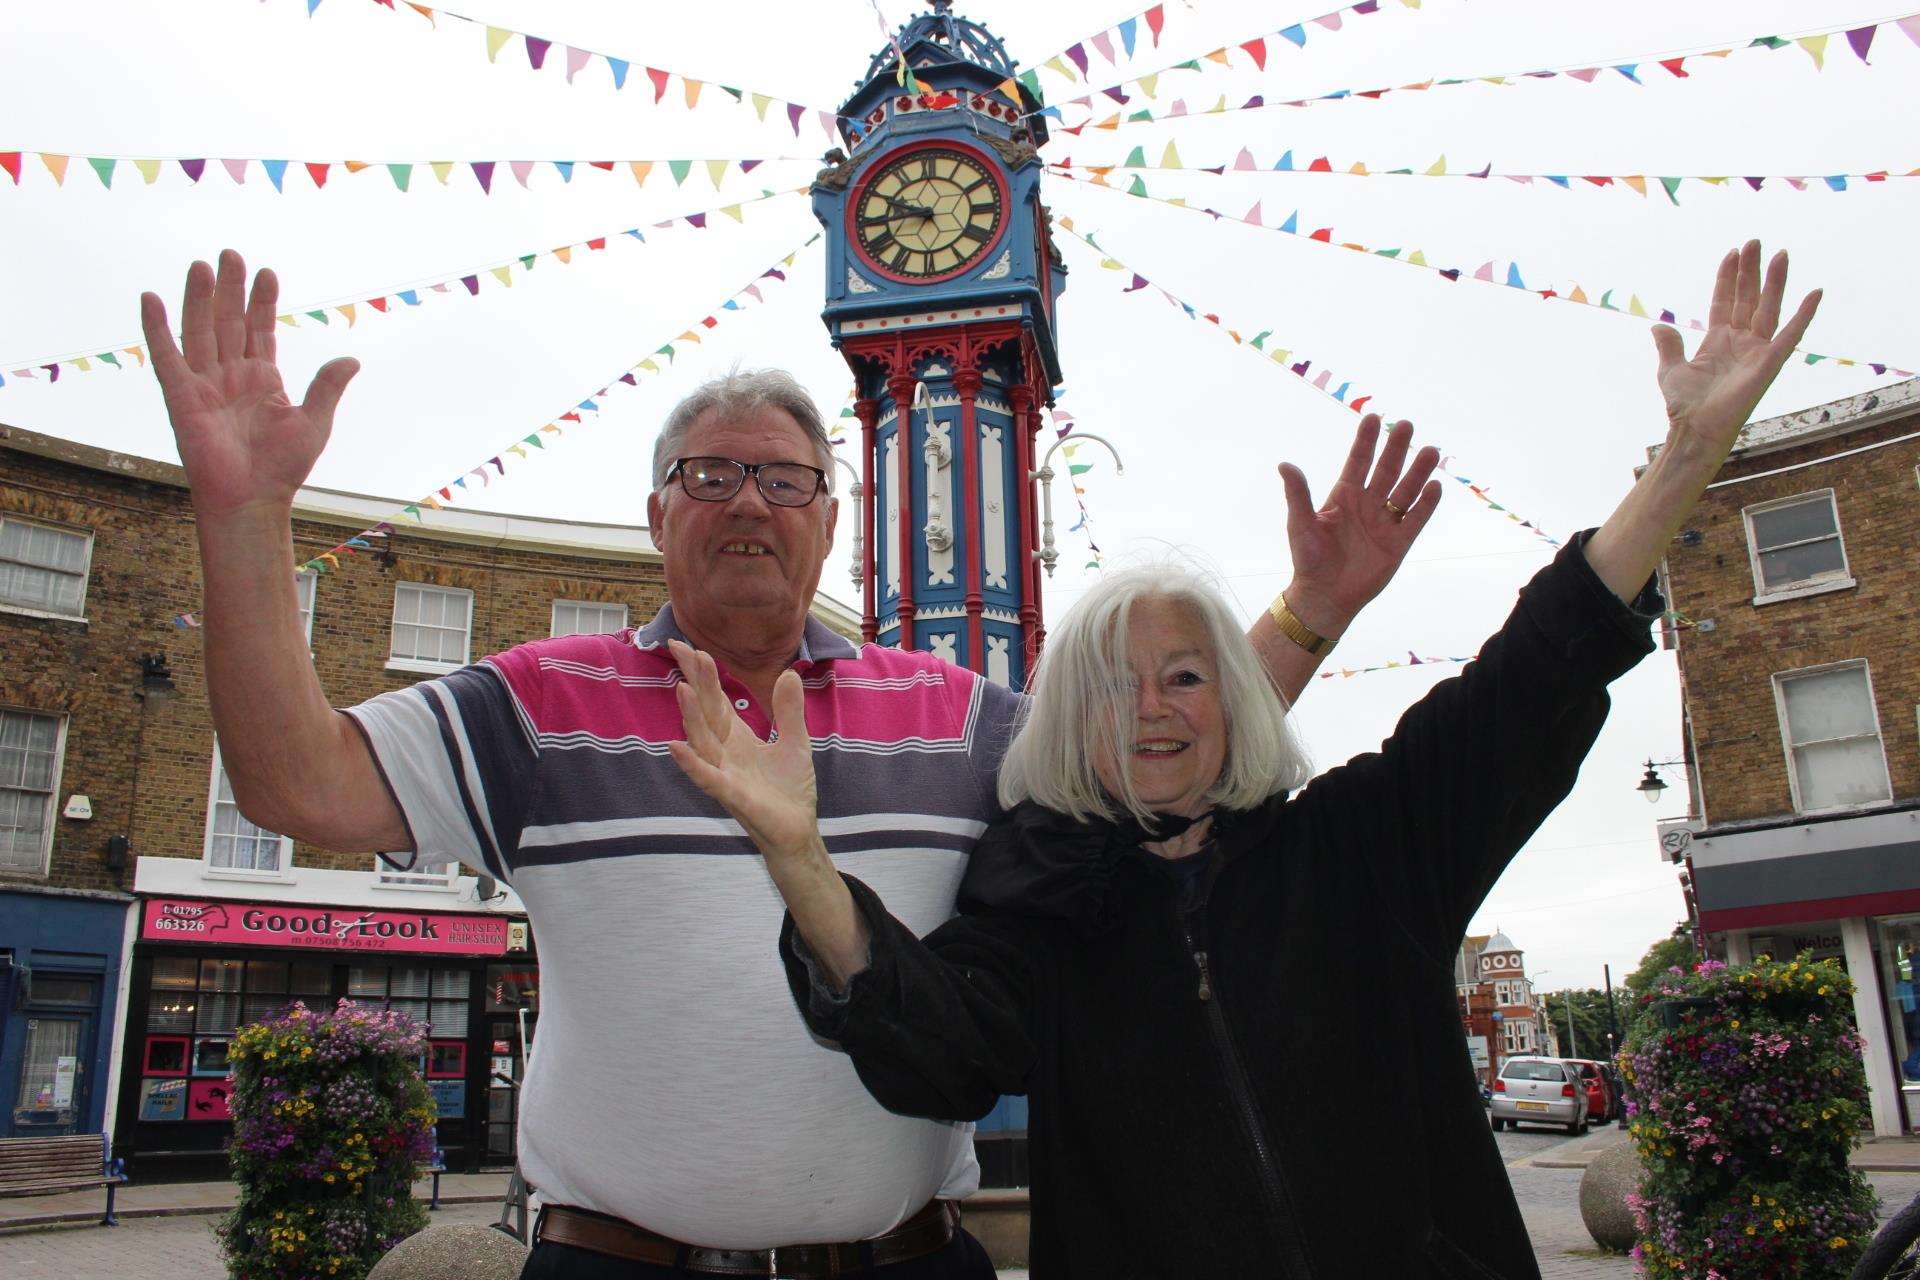 Jubilant: Campaigners Brian Spoor and Lana Henderson celebrate the go-ahead for a Sheerness town council